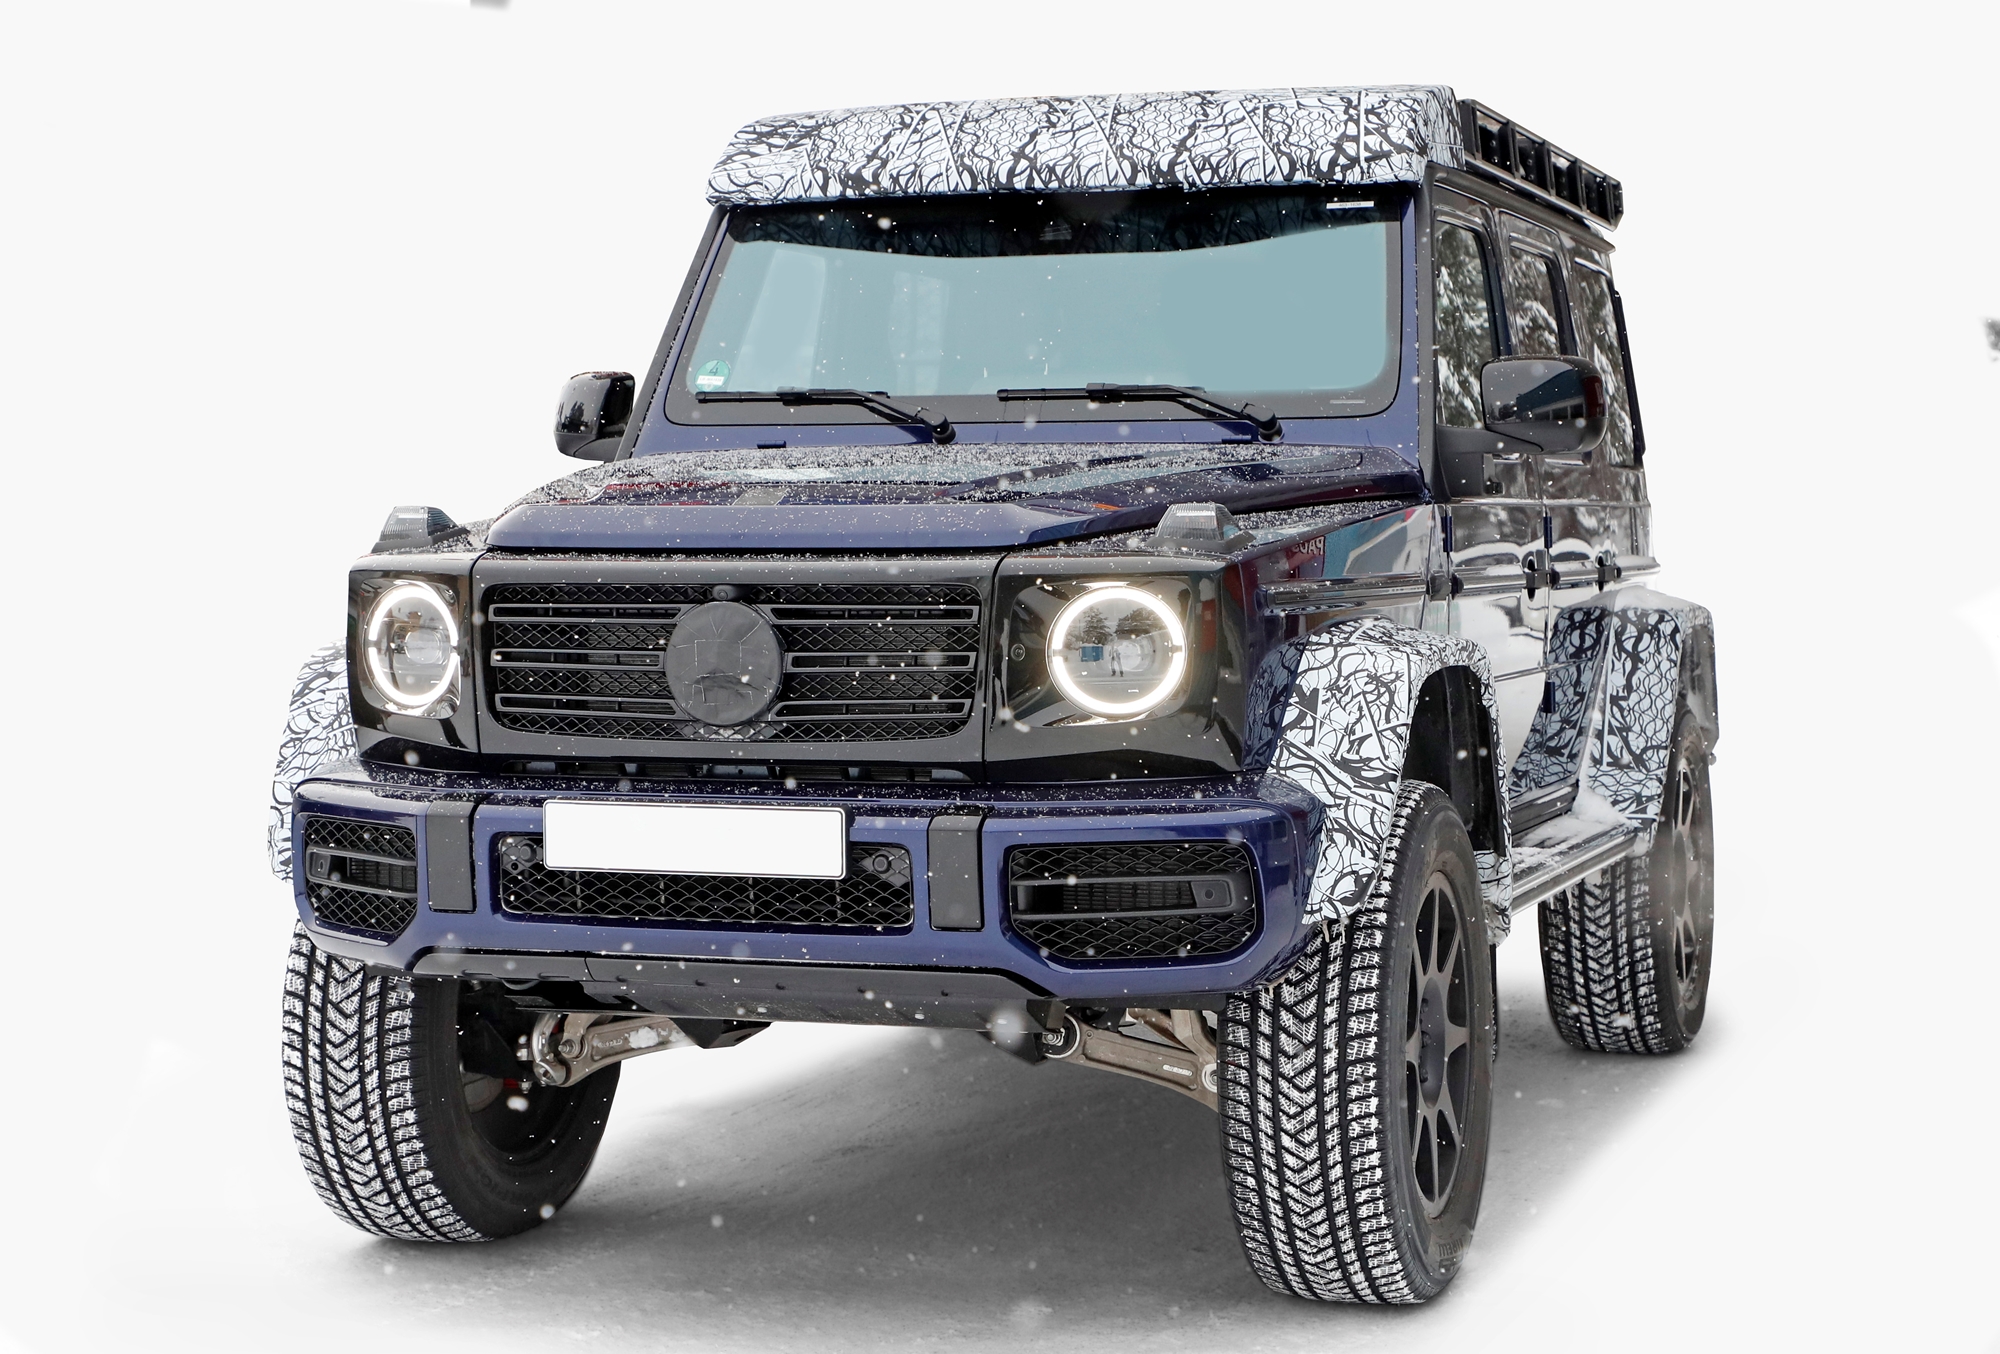 2022 MercedesBenz G550 4x4 Squared Full Specs, Features and Price